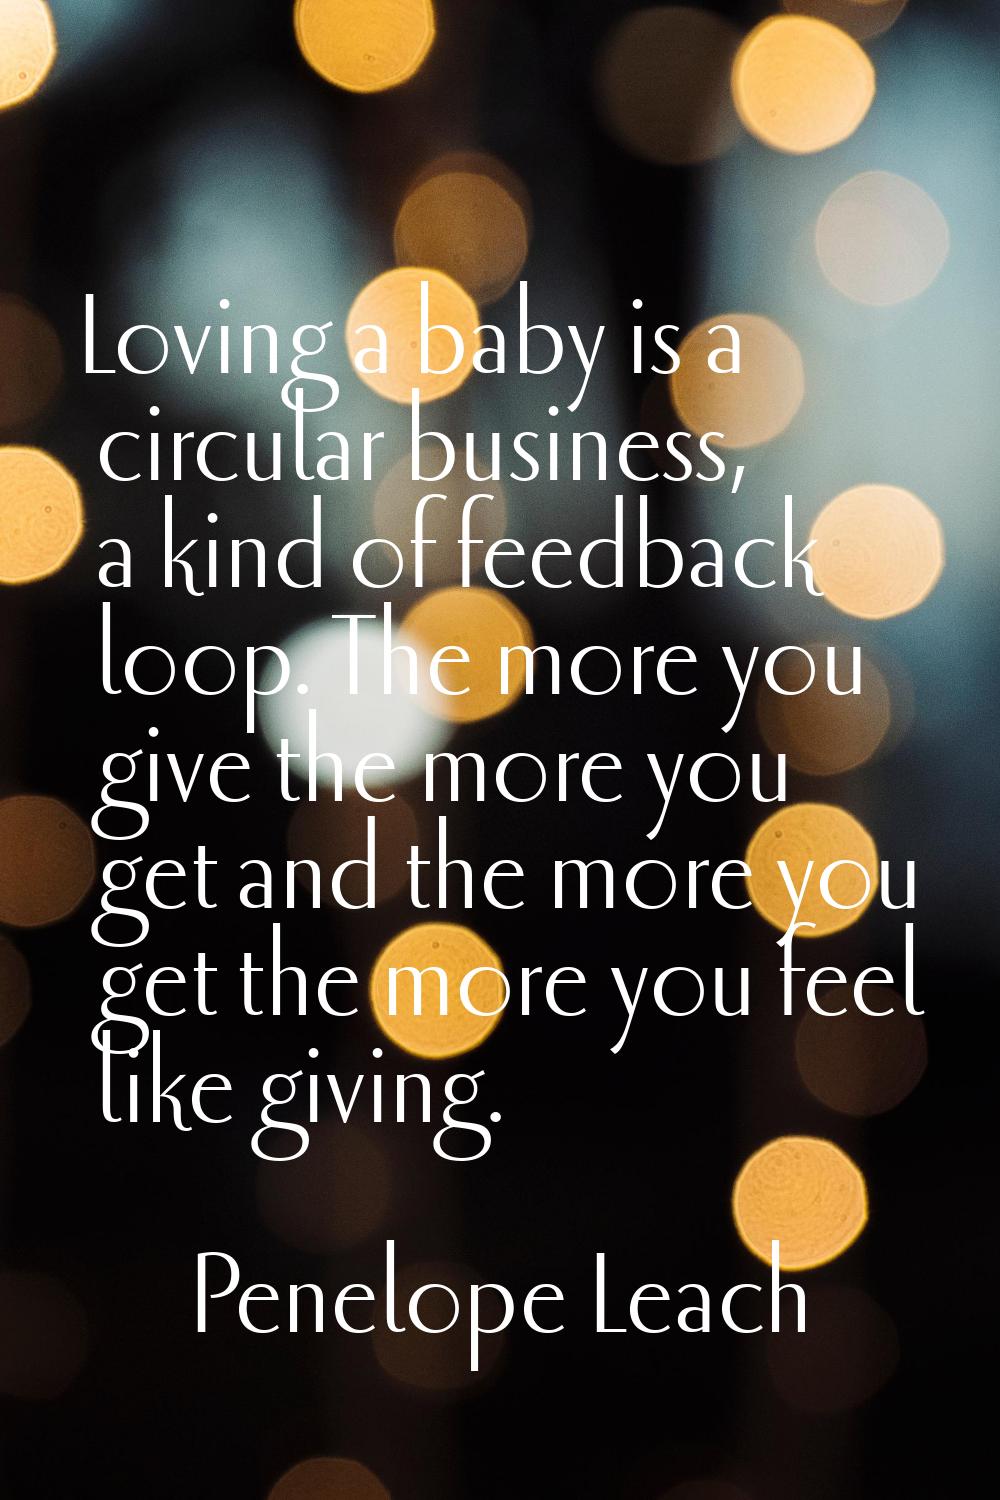 Loving a baby is a circular business, a kind of feedback loop. The more you give the more you get a